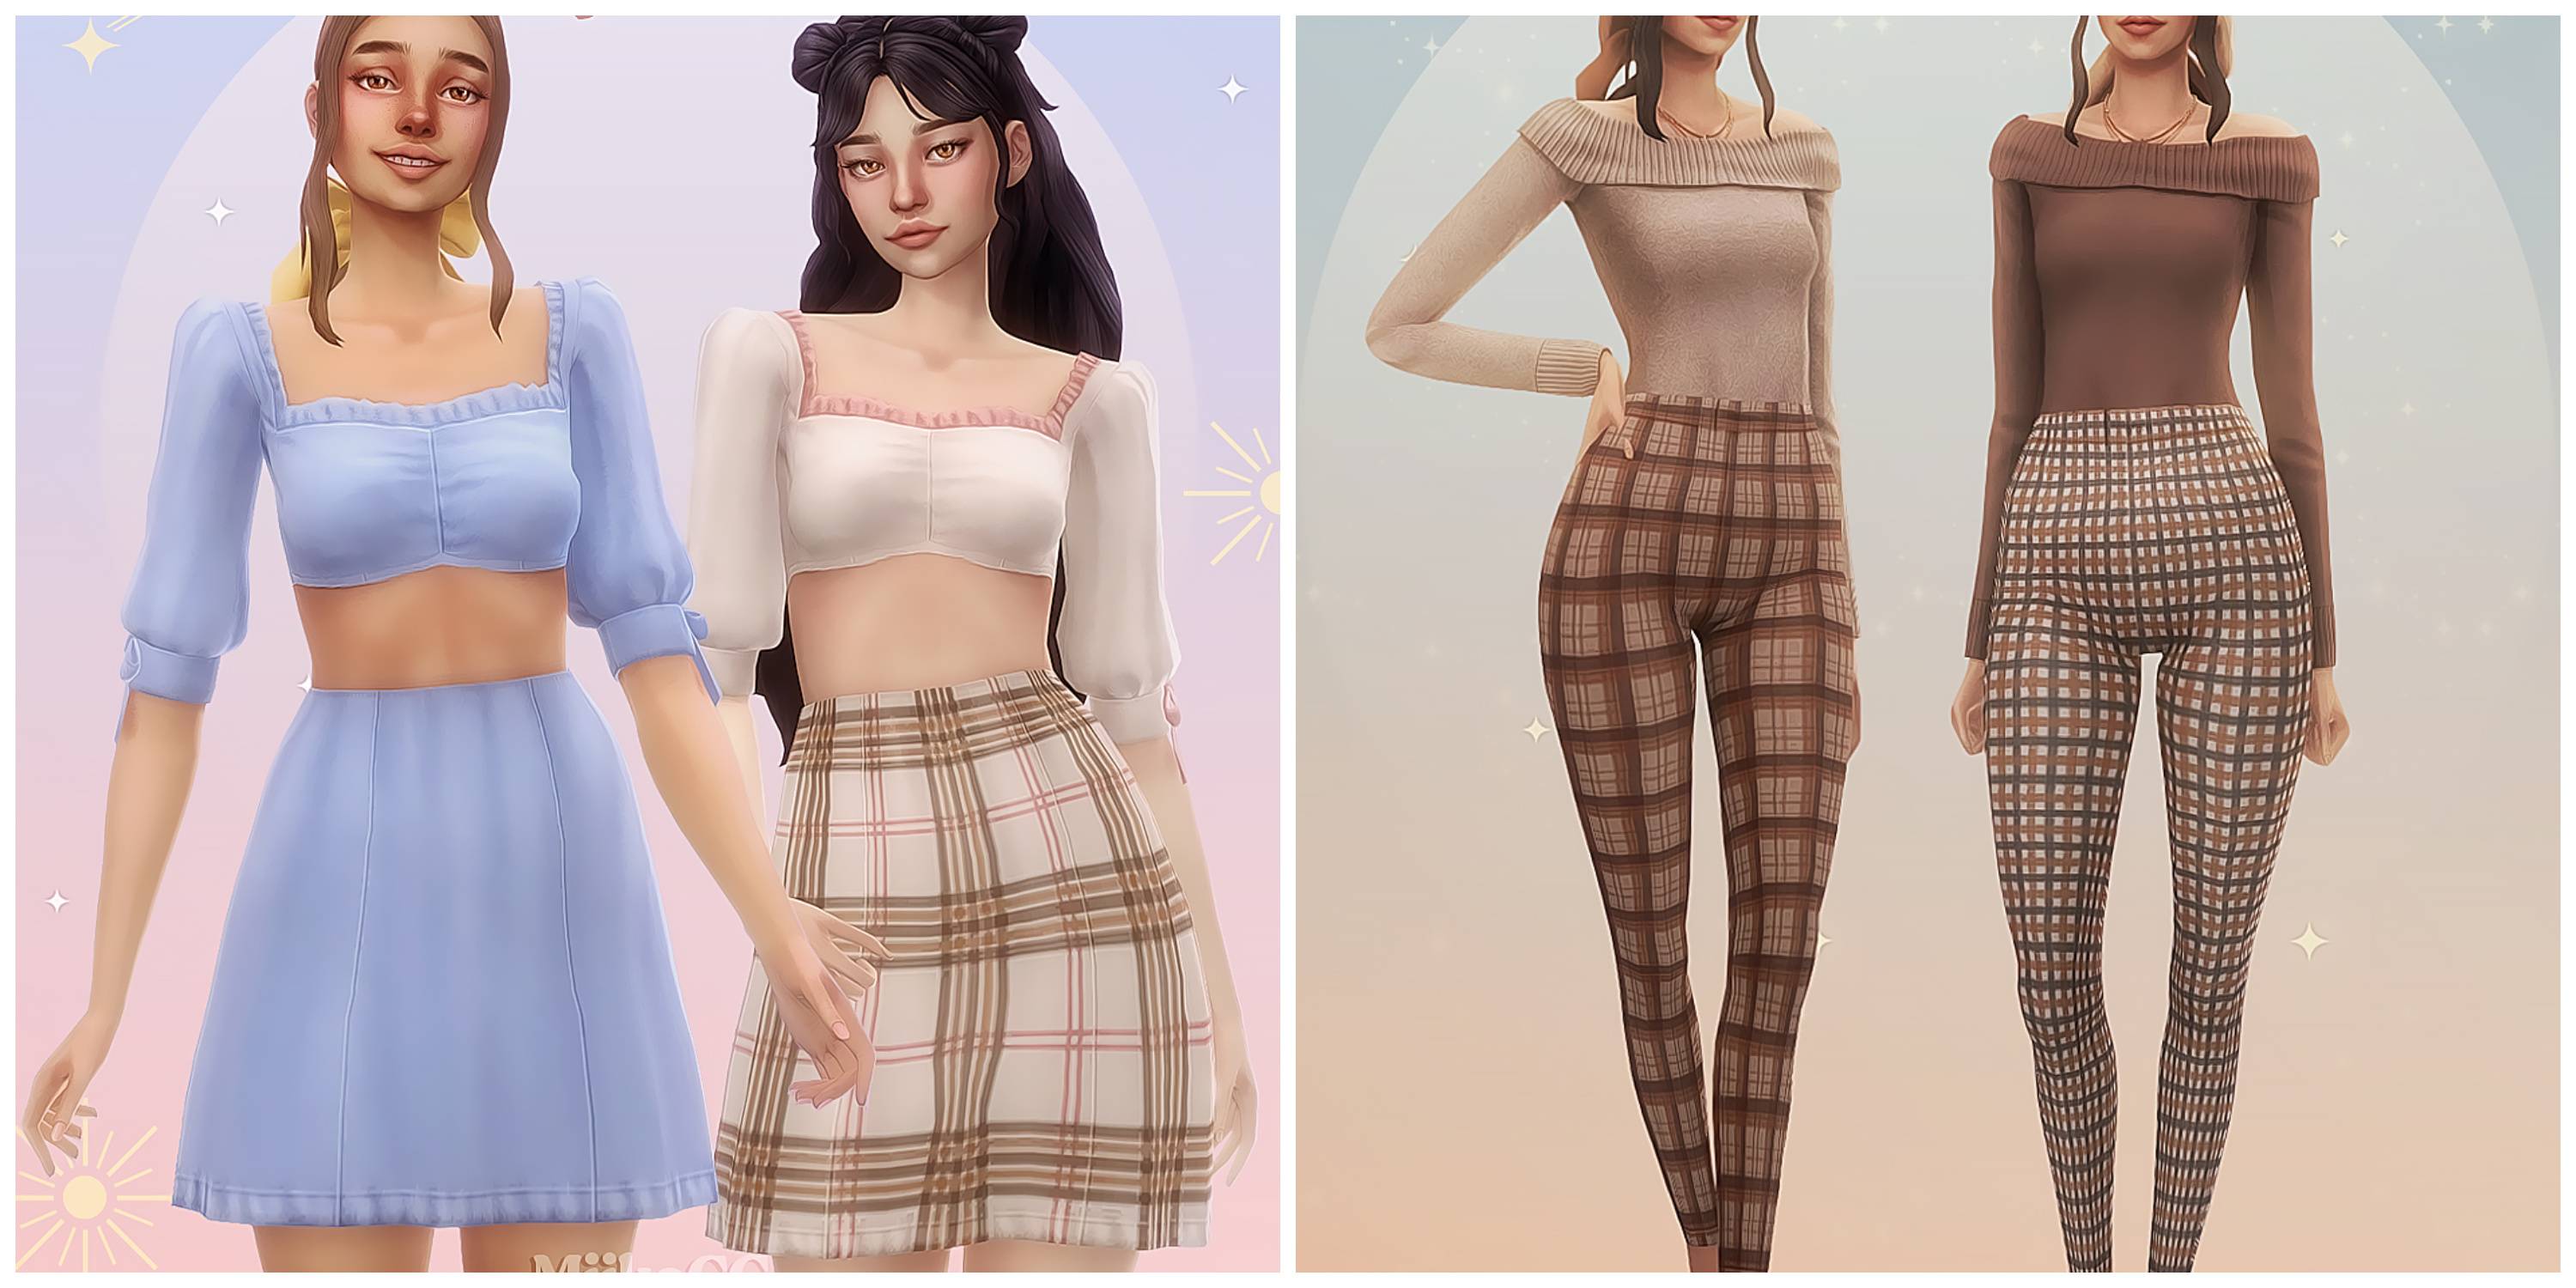 Sims 4 outfit mods